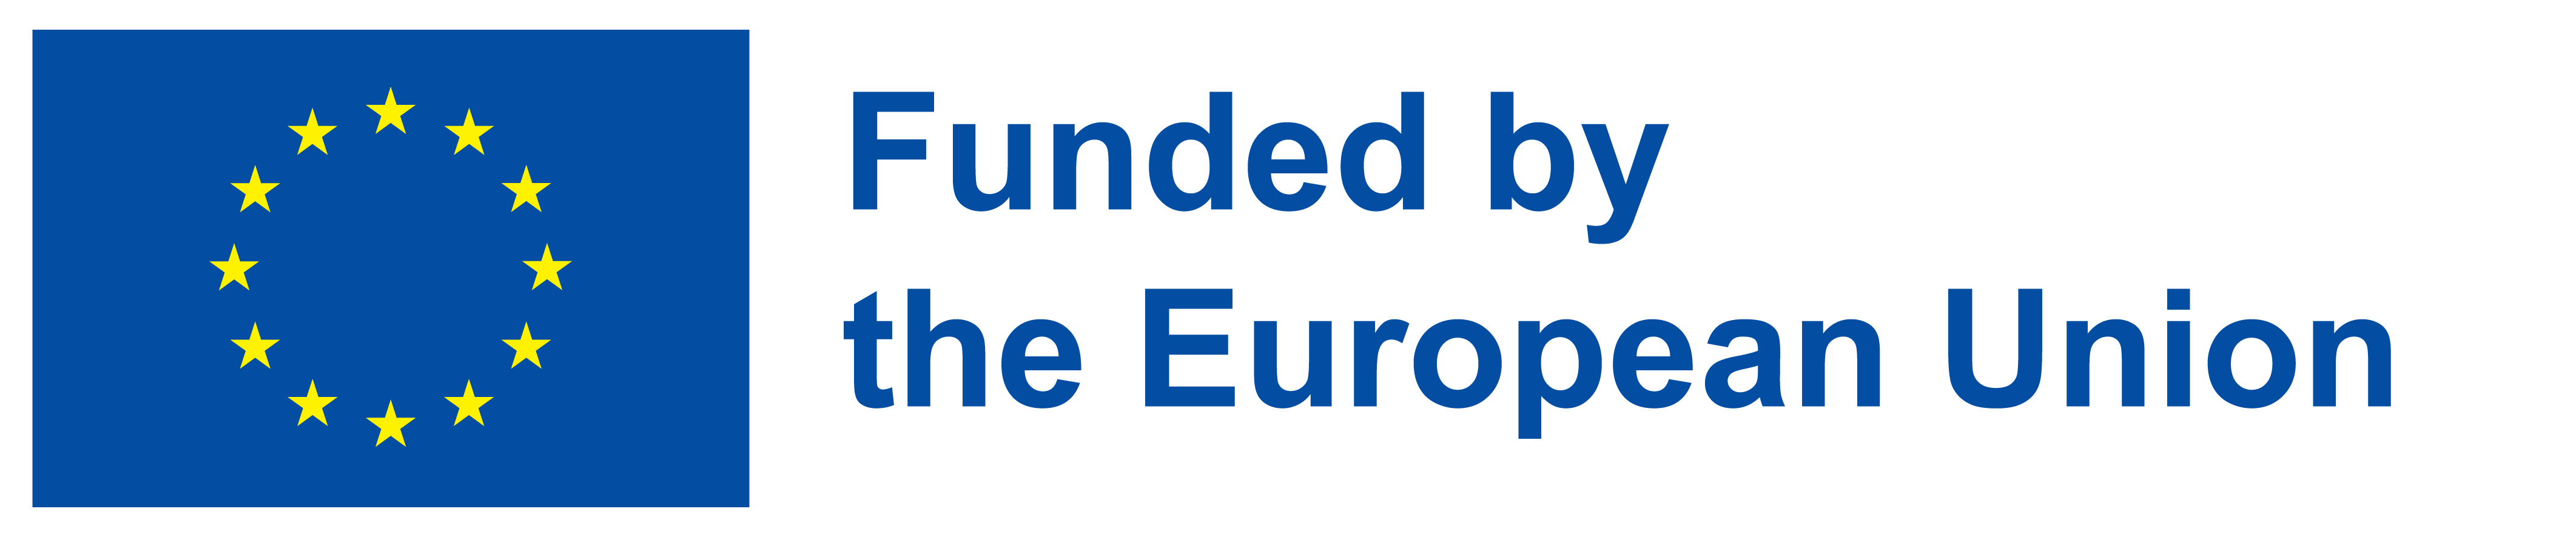 EU logo with description that says 'Funded by the European Union.'